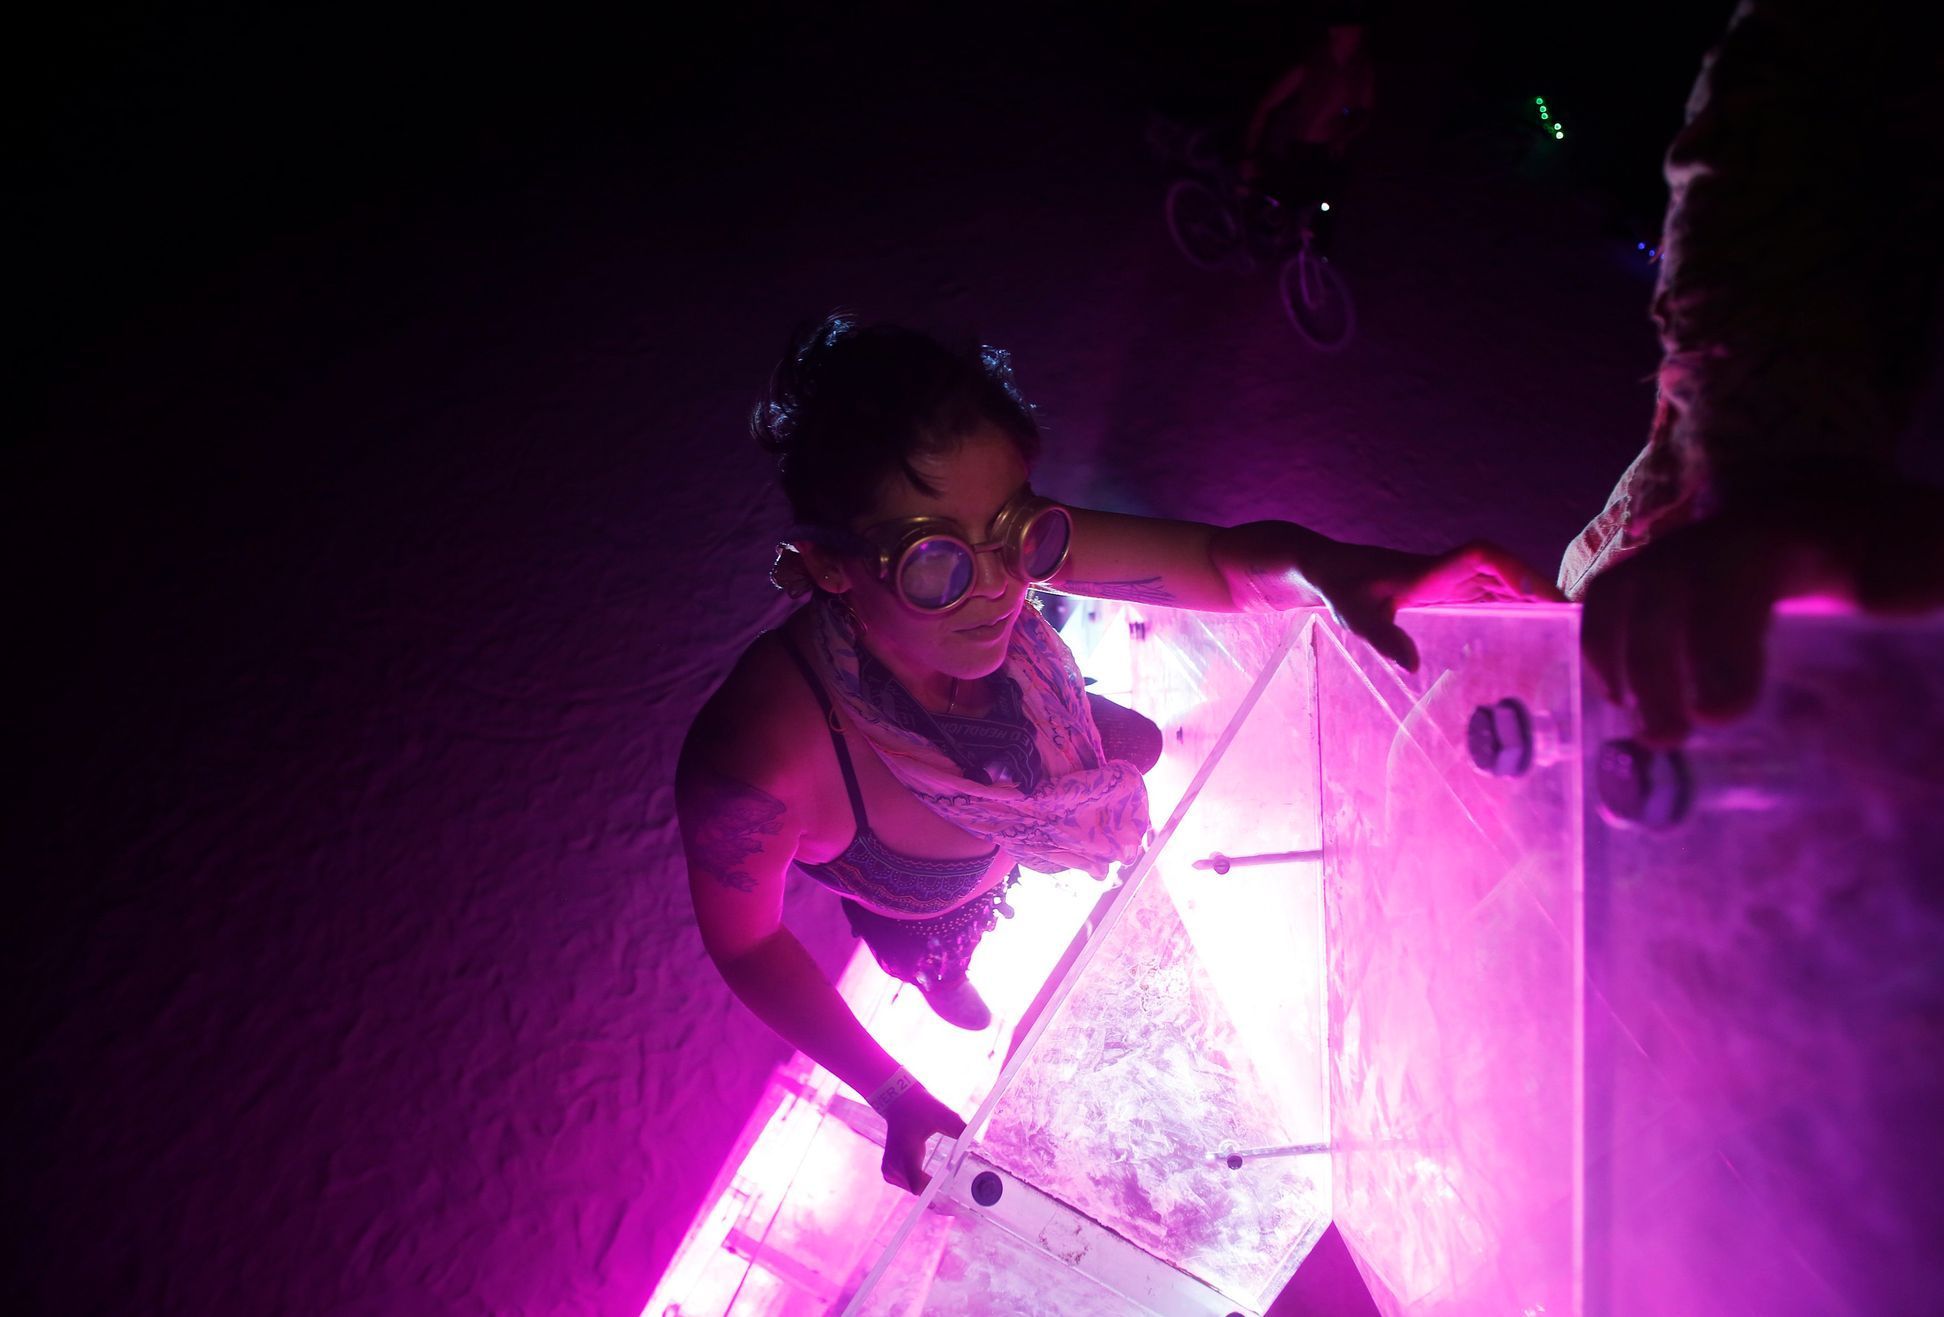 Lynlea Michaels climbs the art installation LumenEssence during the Burning Man 2014 &quot;Caravansary&quot; arts and music festival in the Black Rock Desert of Nevada